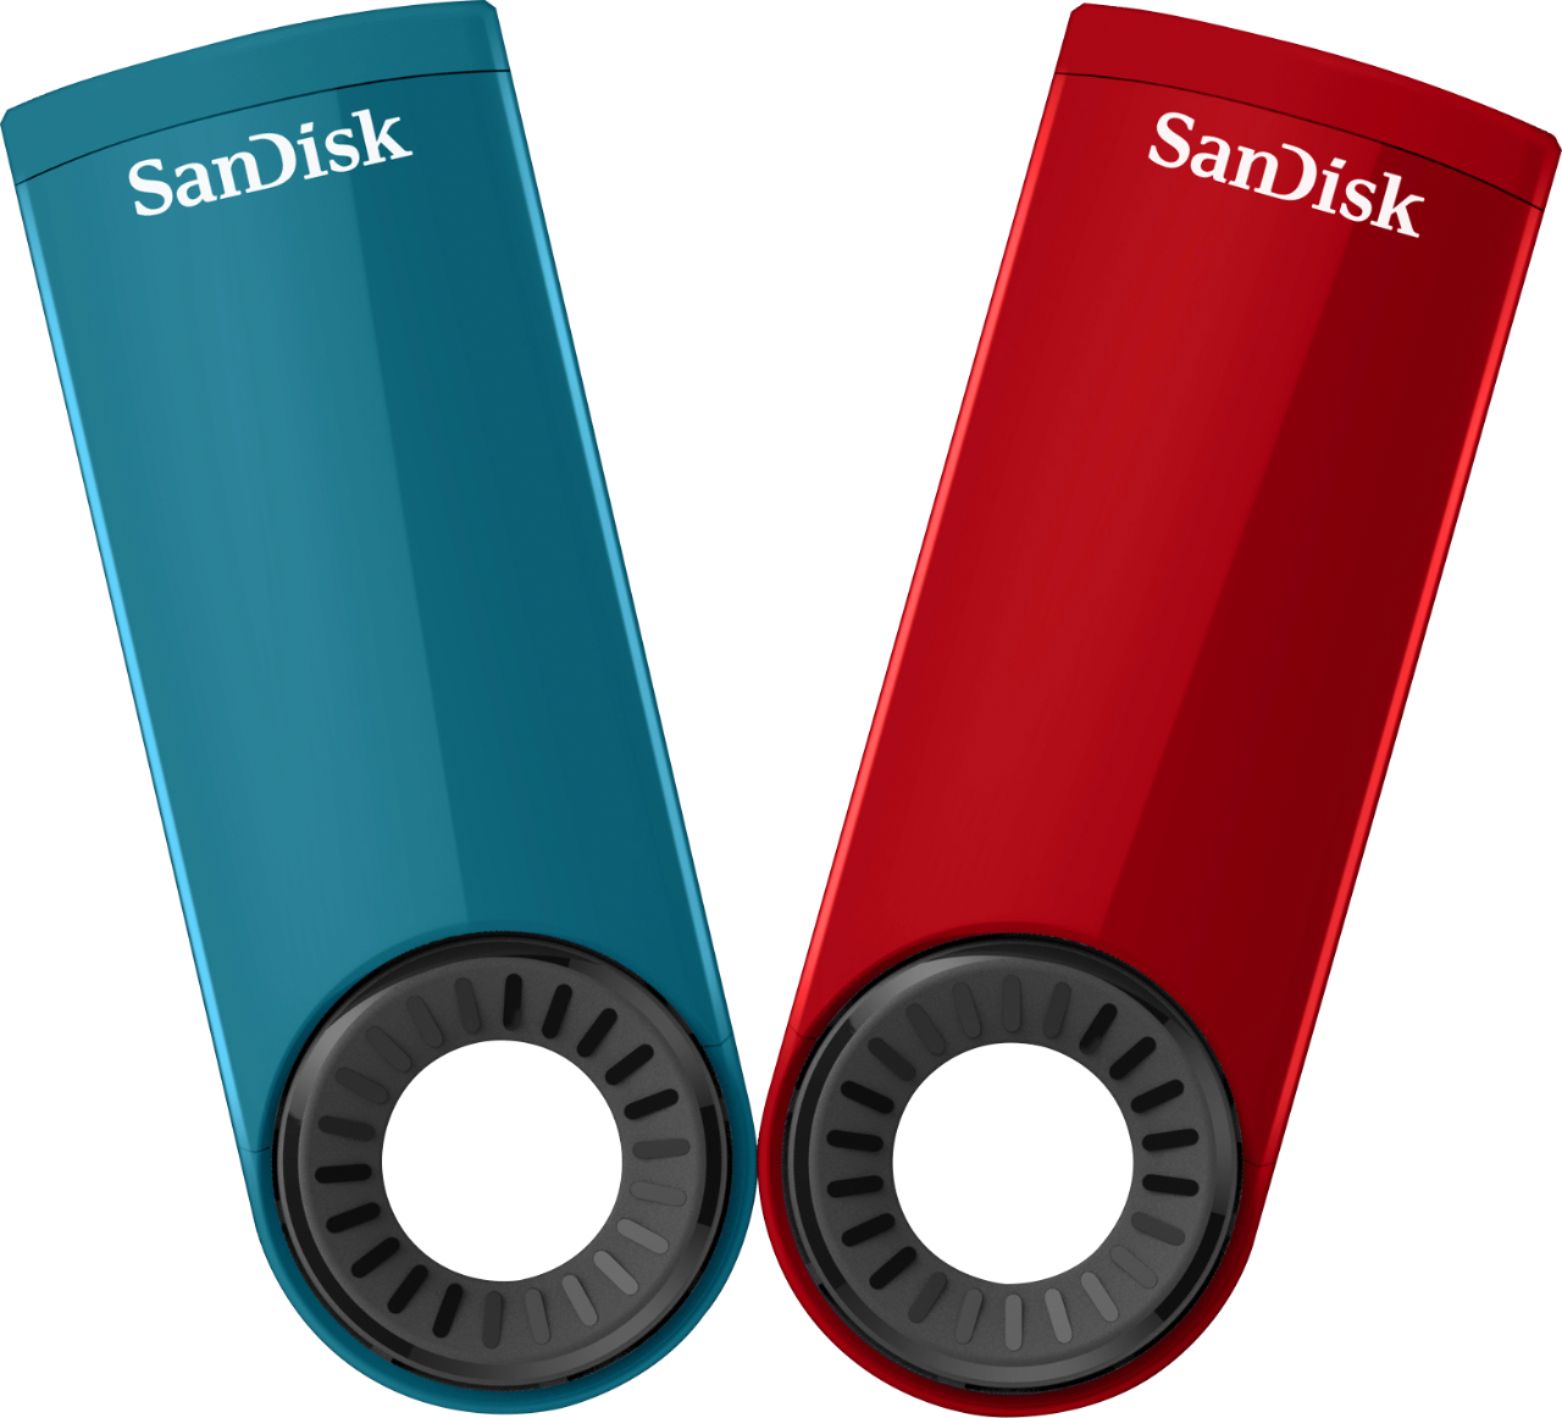 32GB Color Red/White SanDisk USB 2.0 Flash Drive Solid Red/ Swirl 